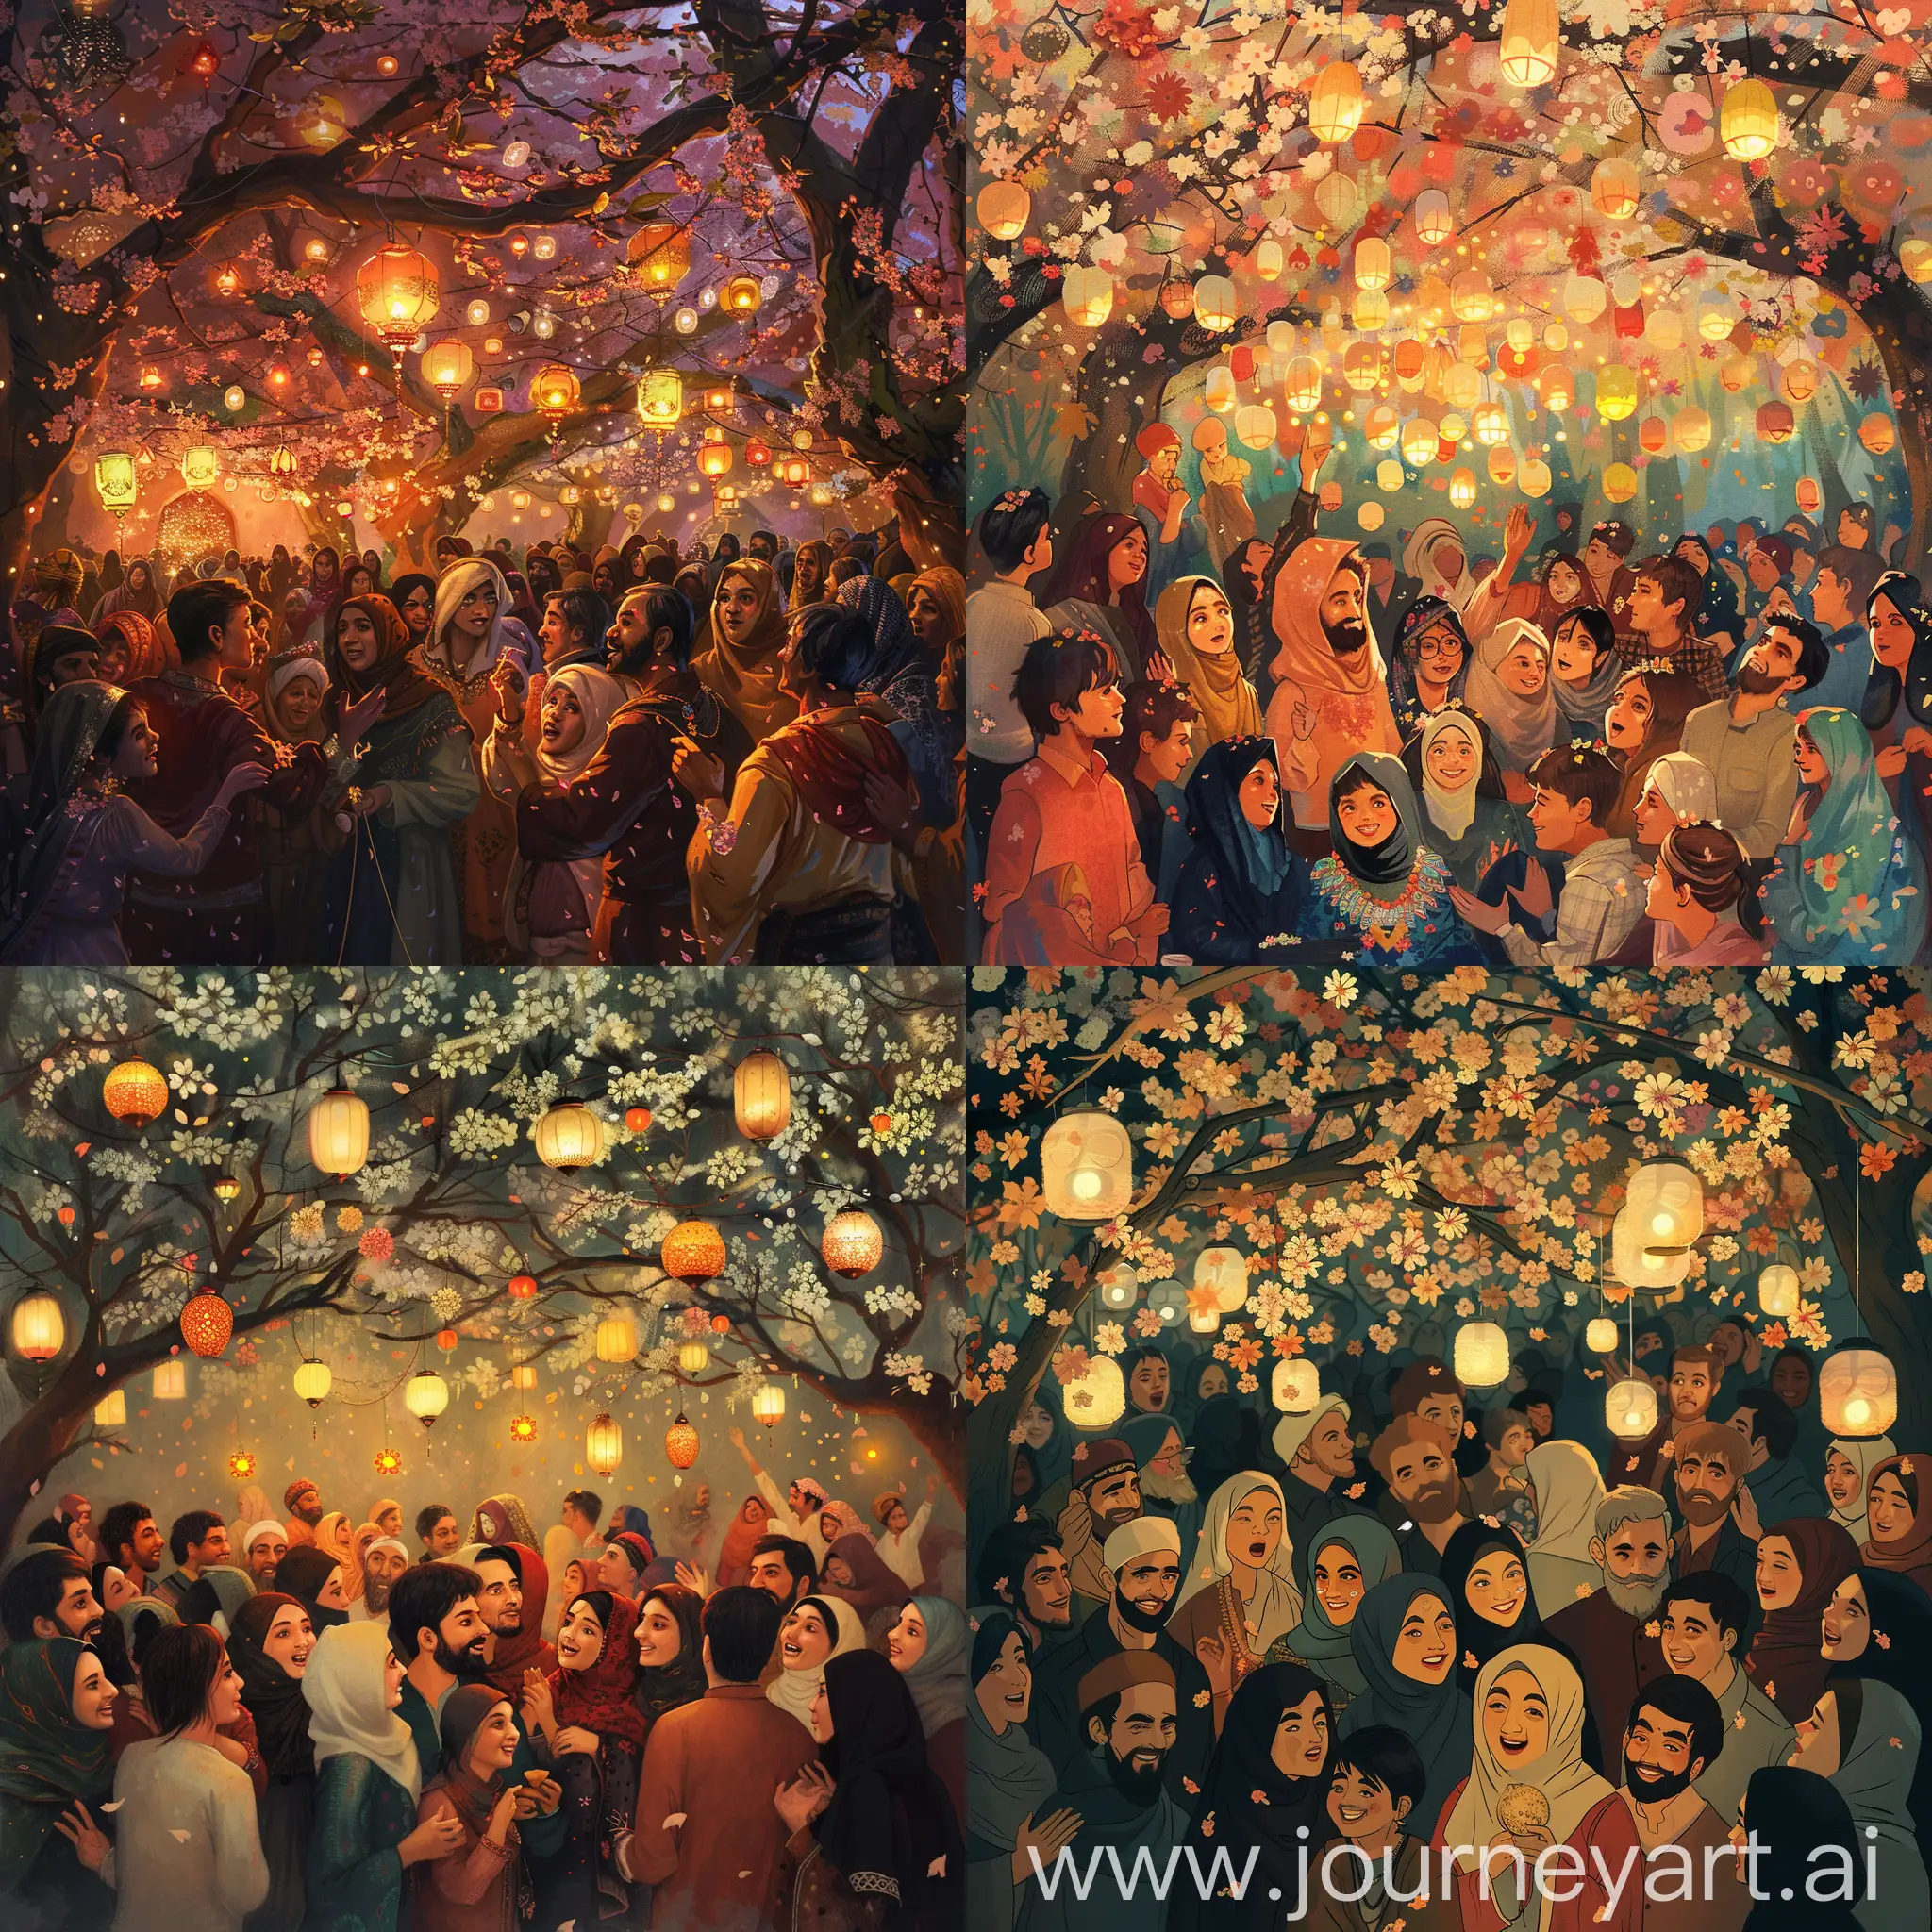 reate an enchanting scene where people from around the world gather under a canopy of blossoms, their faces illuminated by the warm glow of lanterns. Together, they rejoice in the arrival of Nowruz and Eid, their laughter mingling with the music of celebration. Let the image radiate with the spirit of unity and renewal as cultures merge in harmony,
